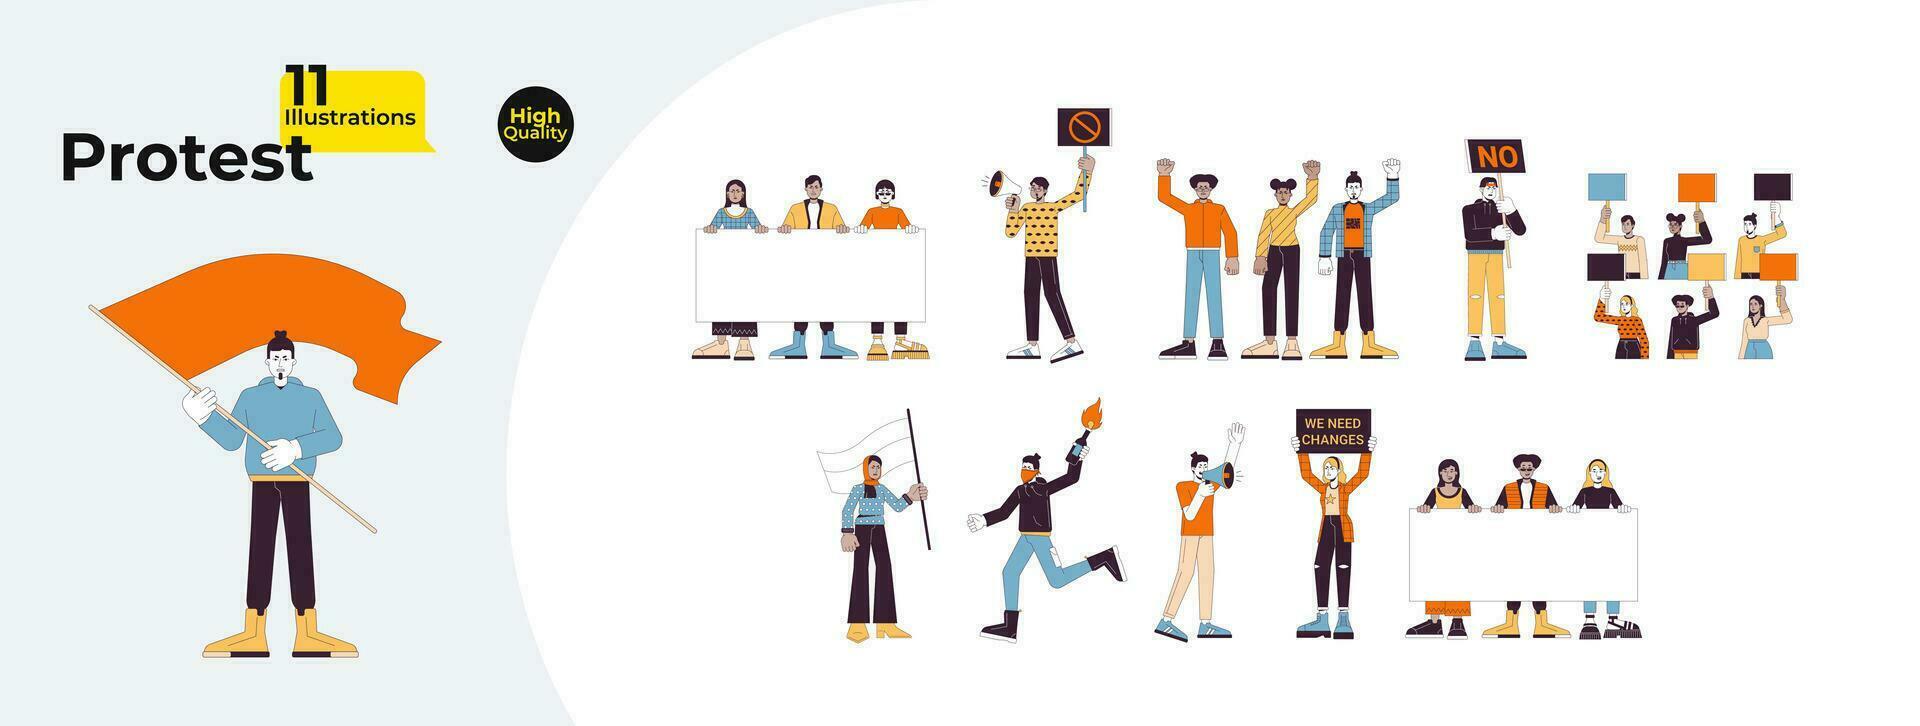 Protest demonstration line cartoon flat illustration bundle. Multicultural people protesting placards 2D lineart characters isolated on white background. Social justice vector color image collection